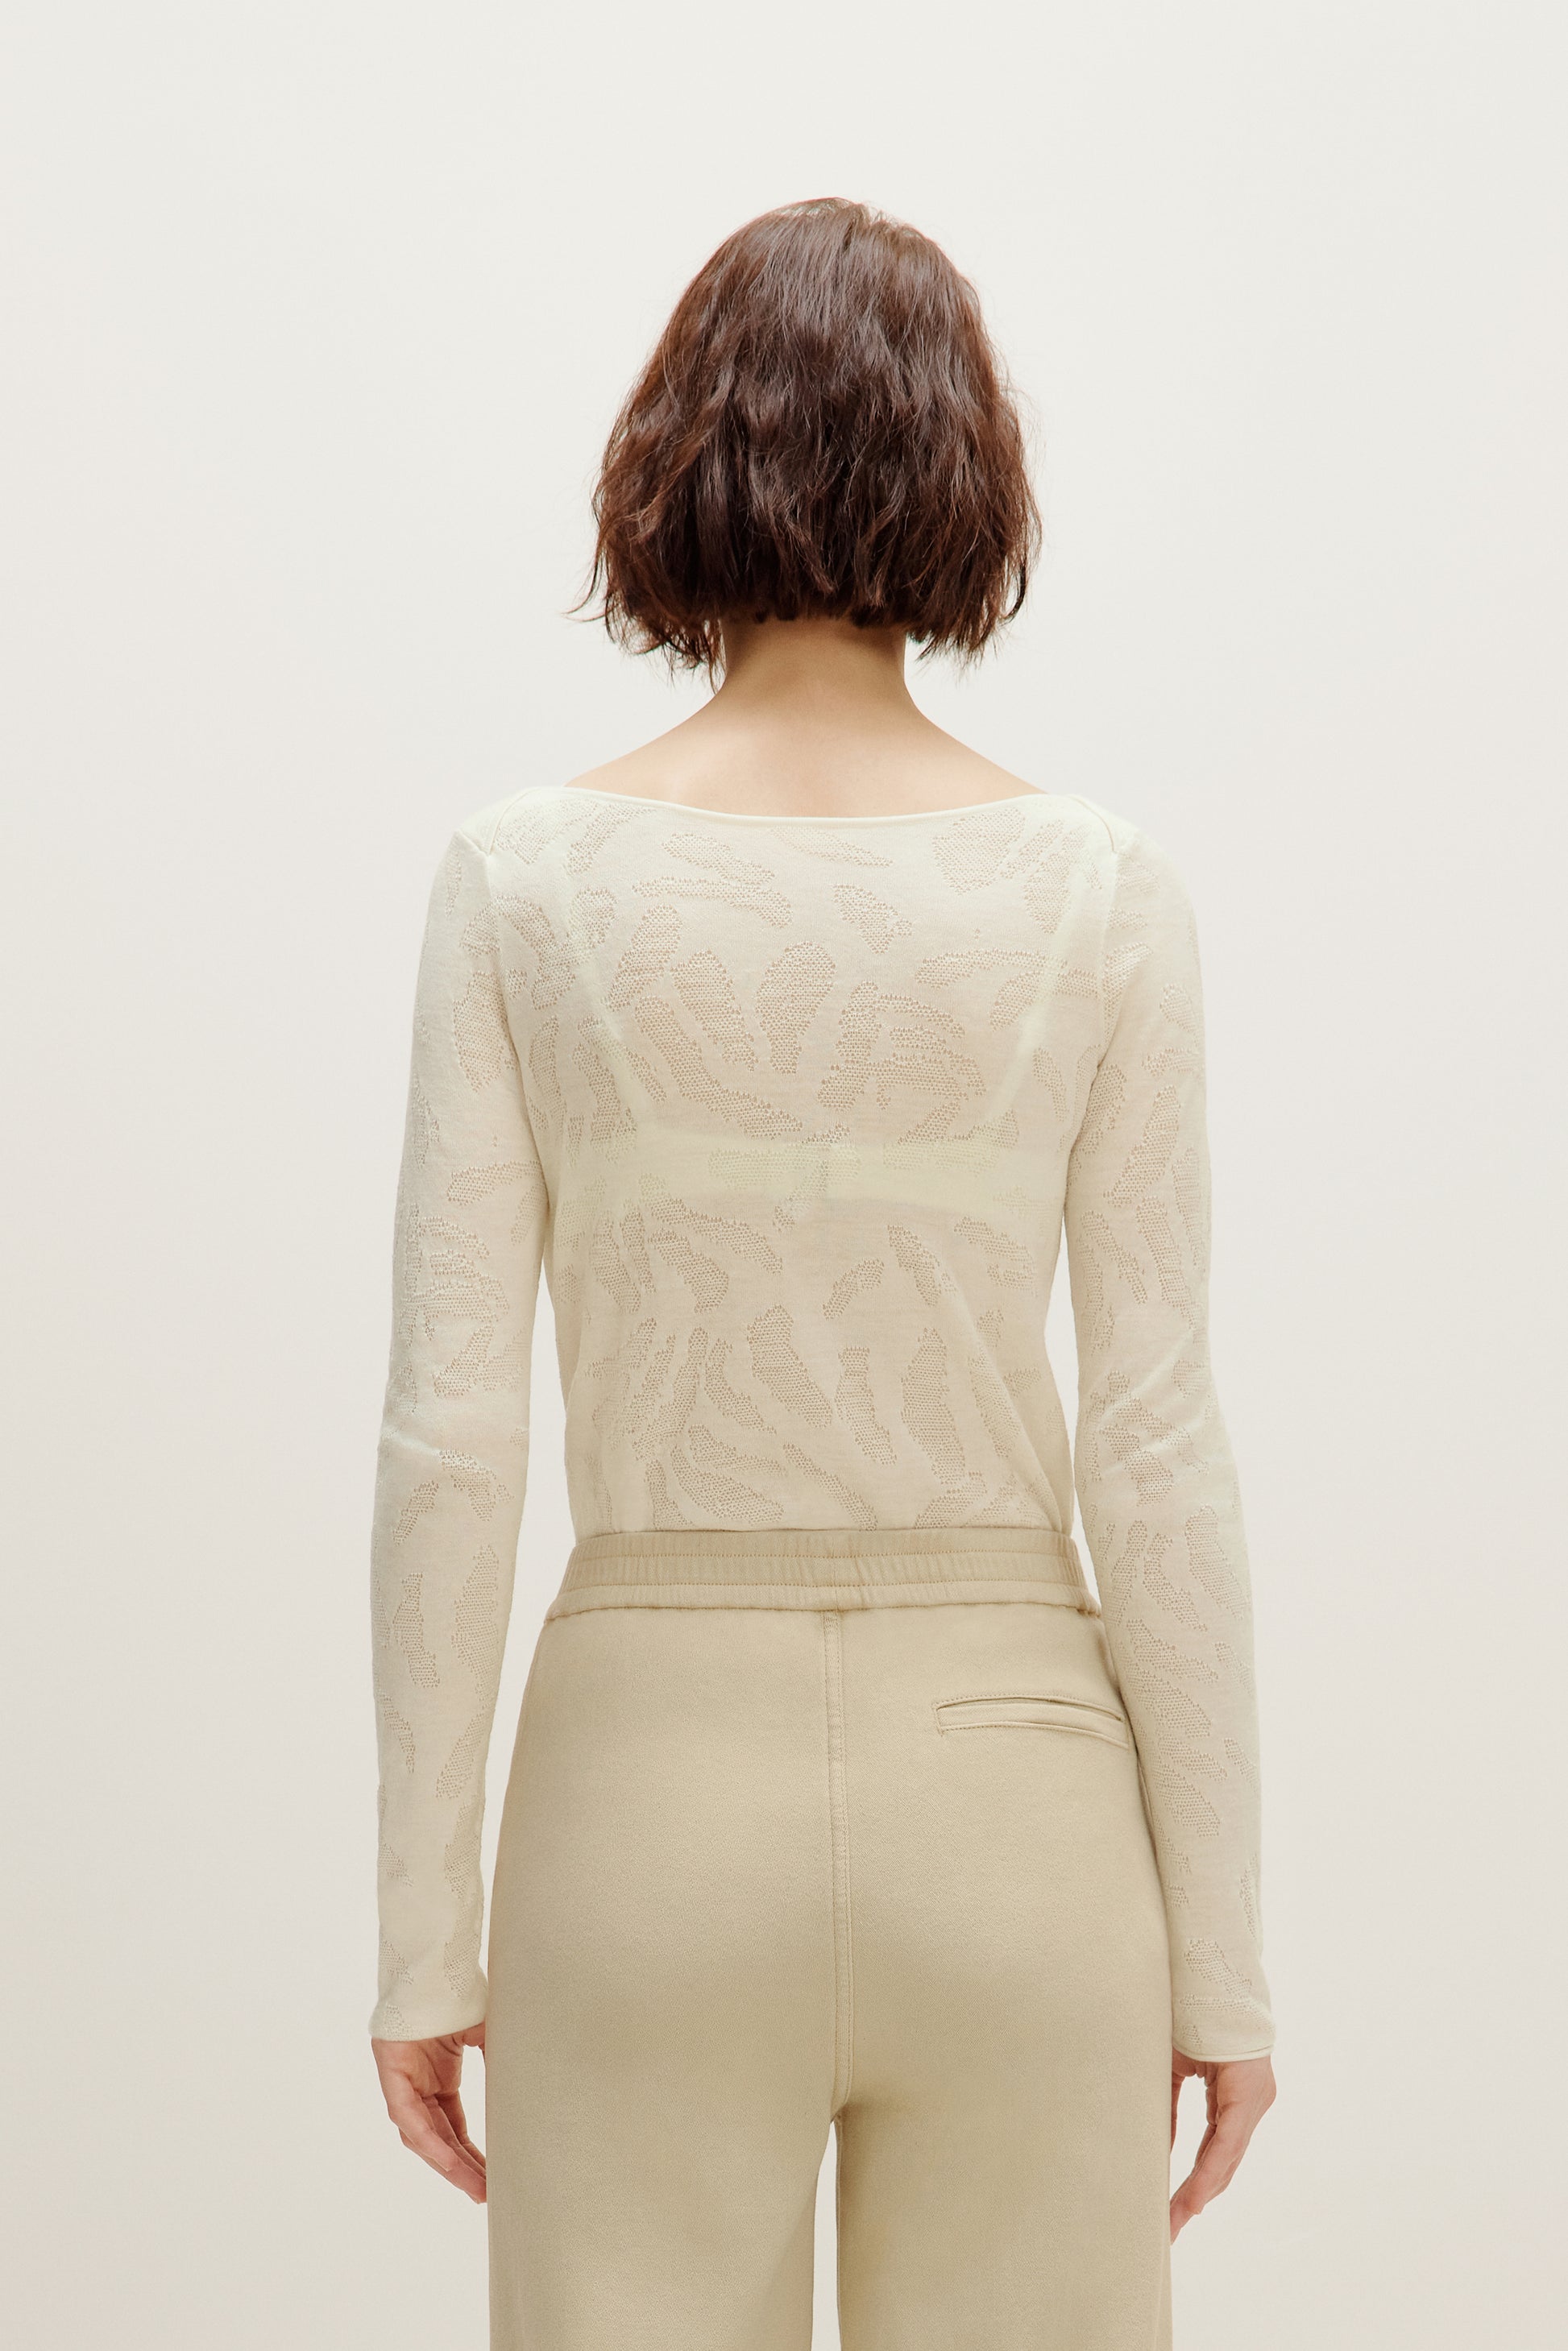 back of a woman wearing a white sweater and white pants